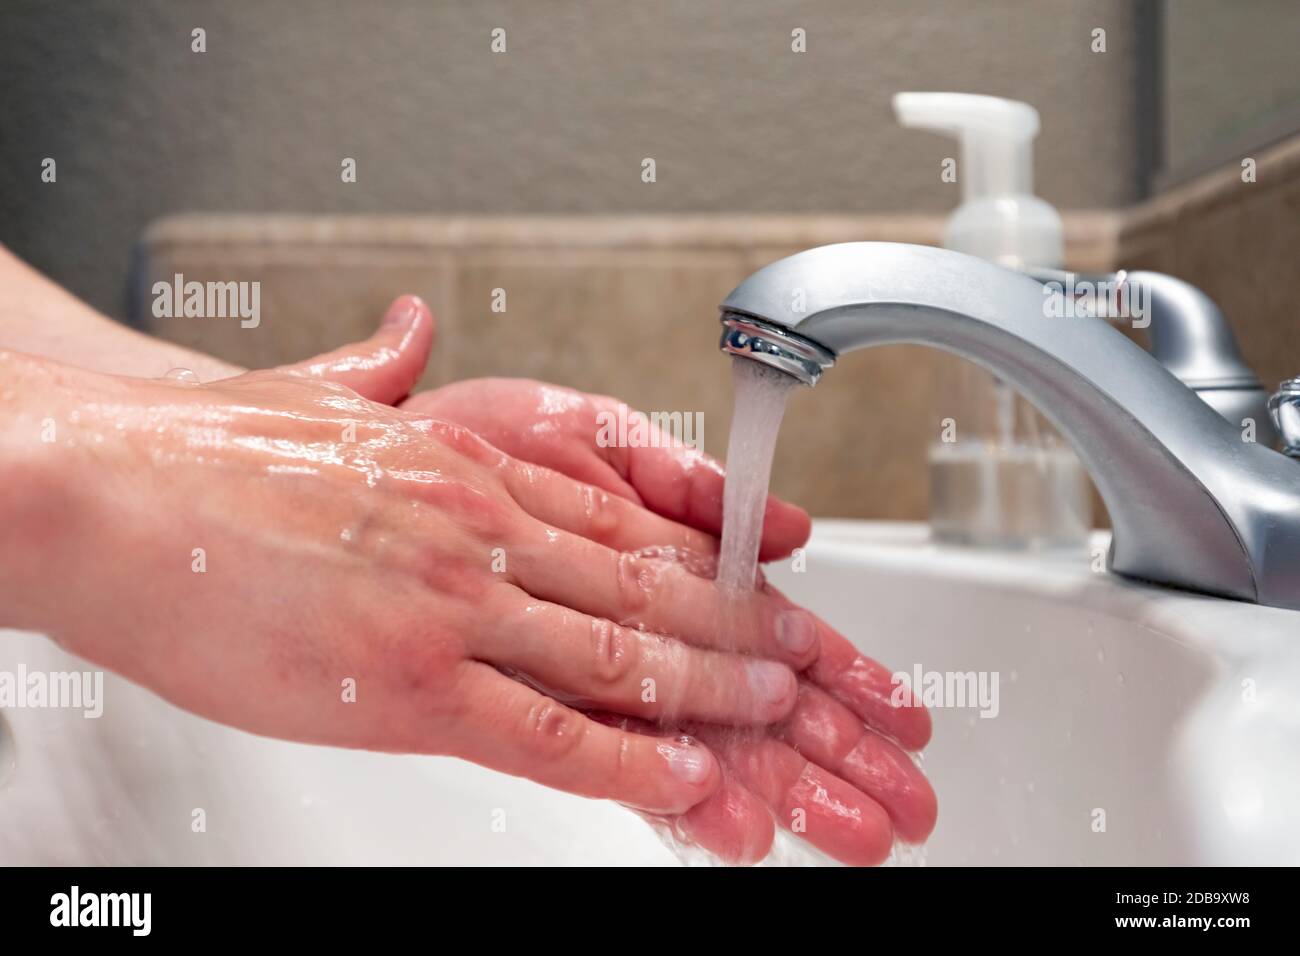 Washing hands with water in bathroom sink, hygiene to stay healthy Stock Photo